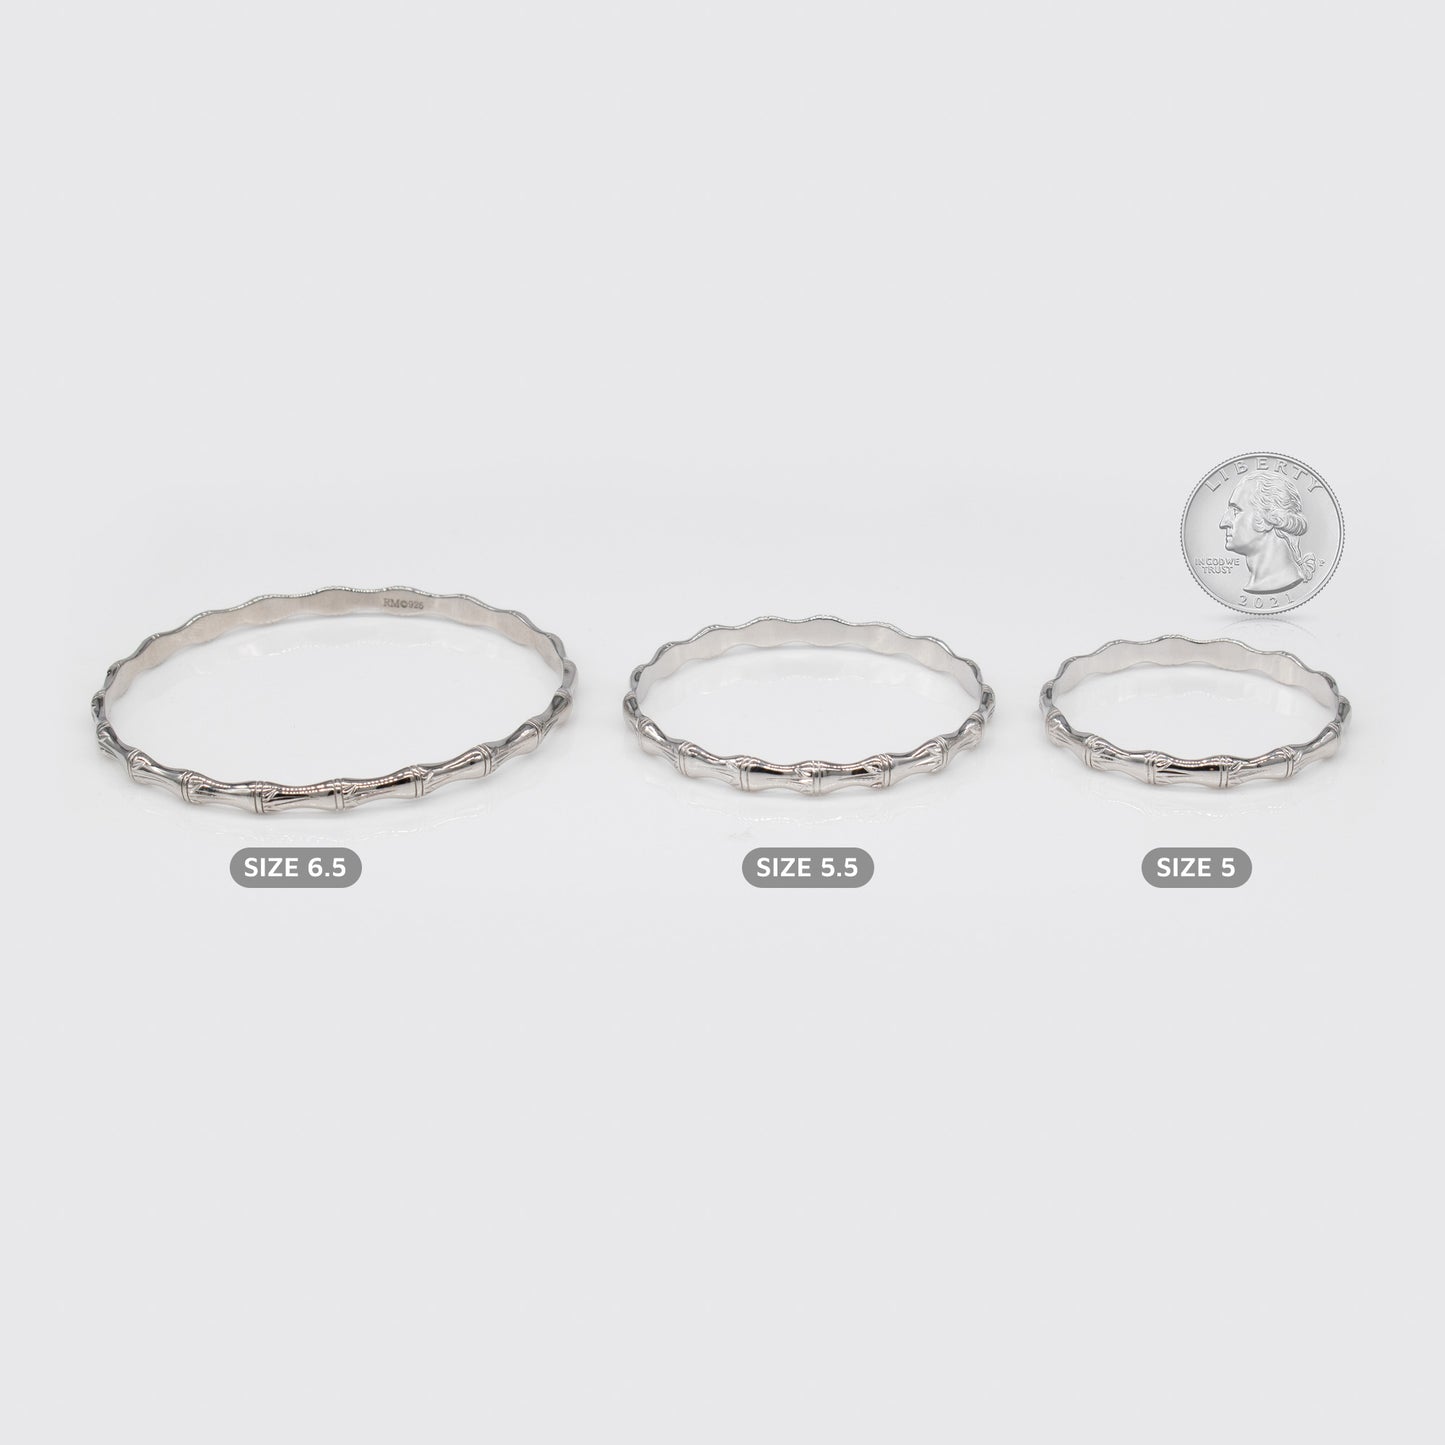 Kids Sterling Silver and Rhodium Bamboo Design Rosa Bangle. Size 5, 5.5, and 6.5.